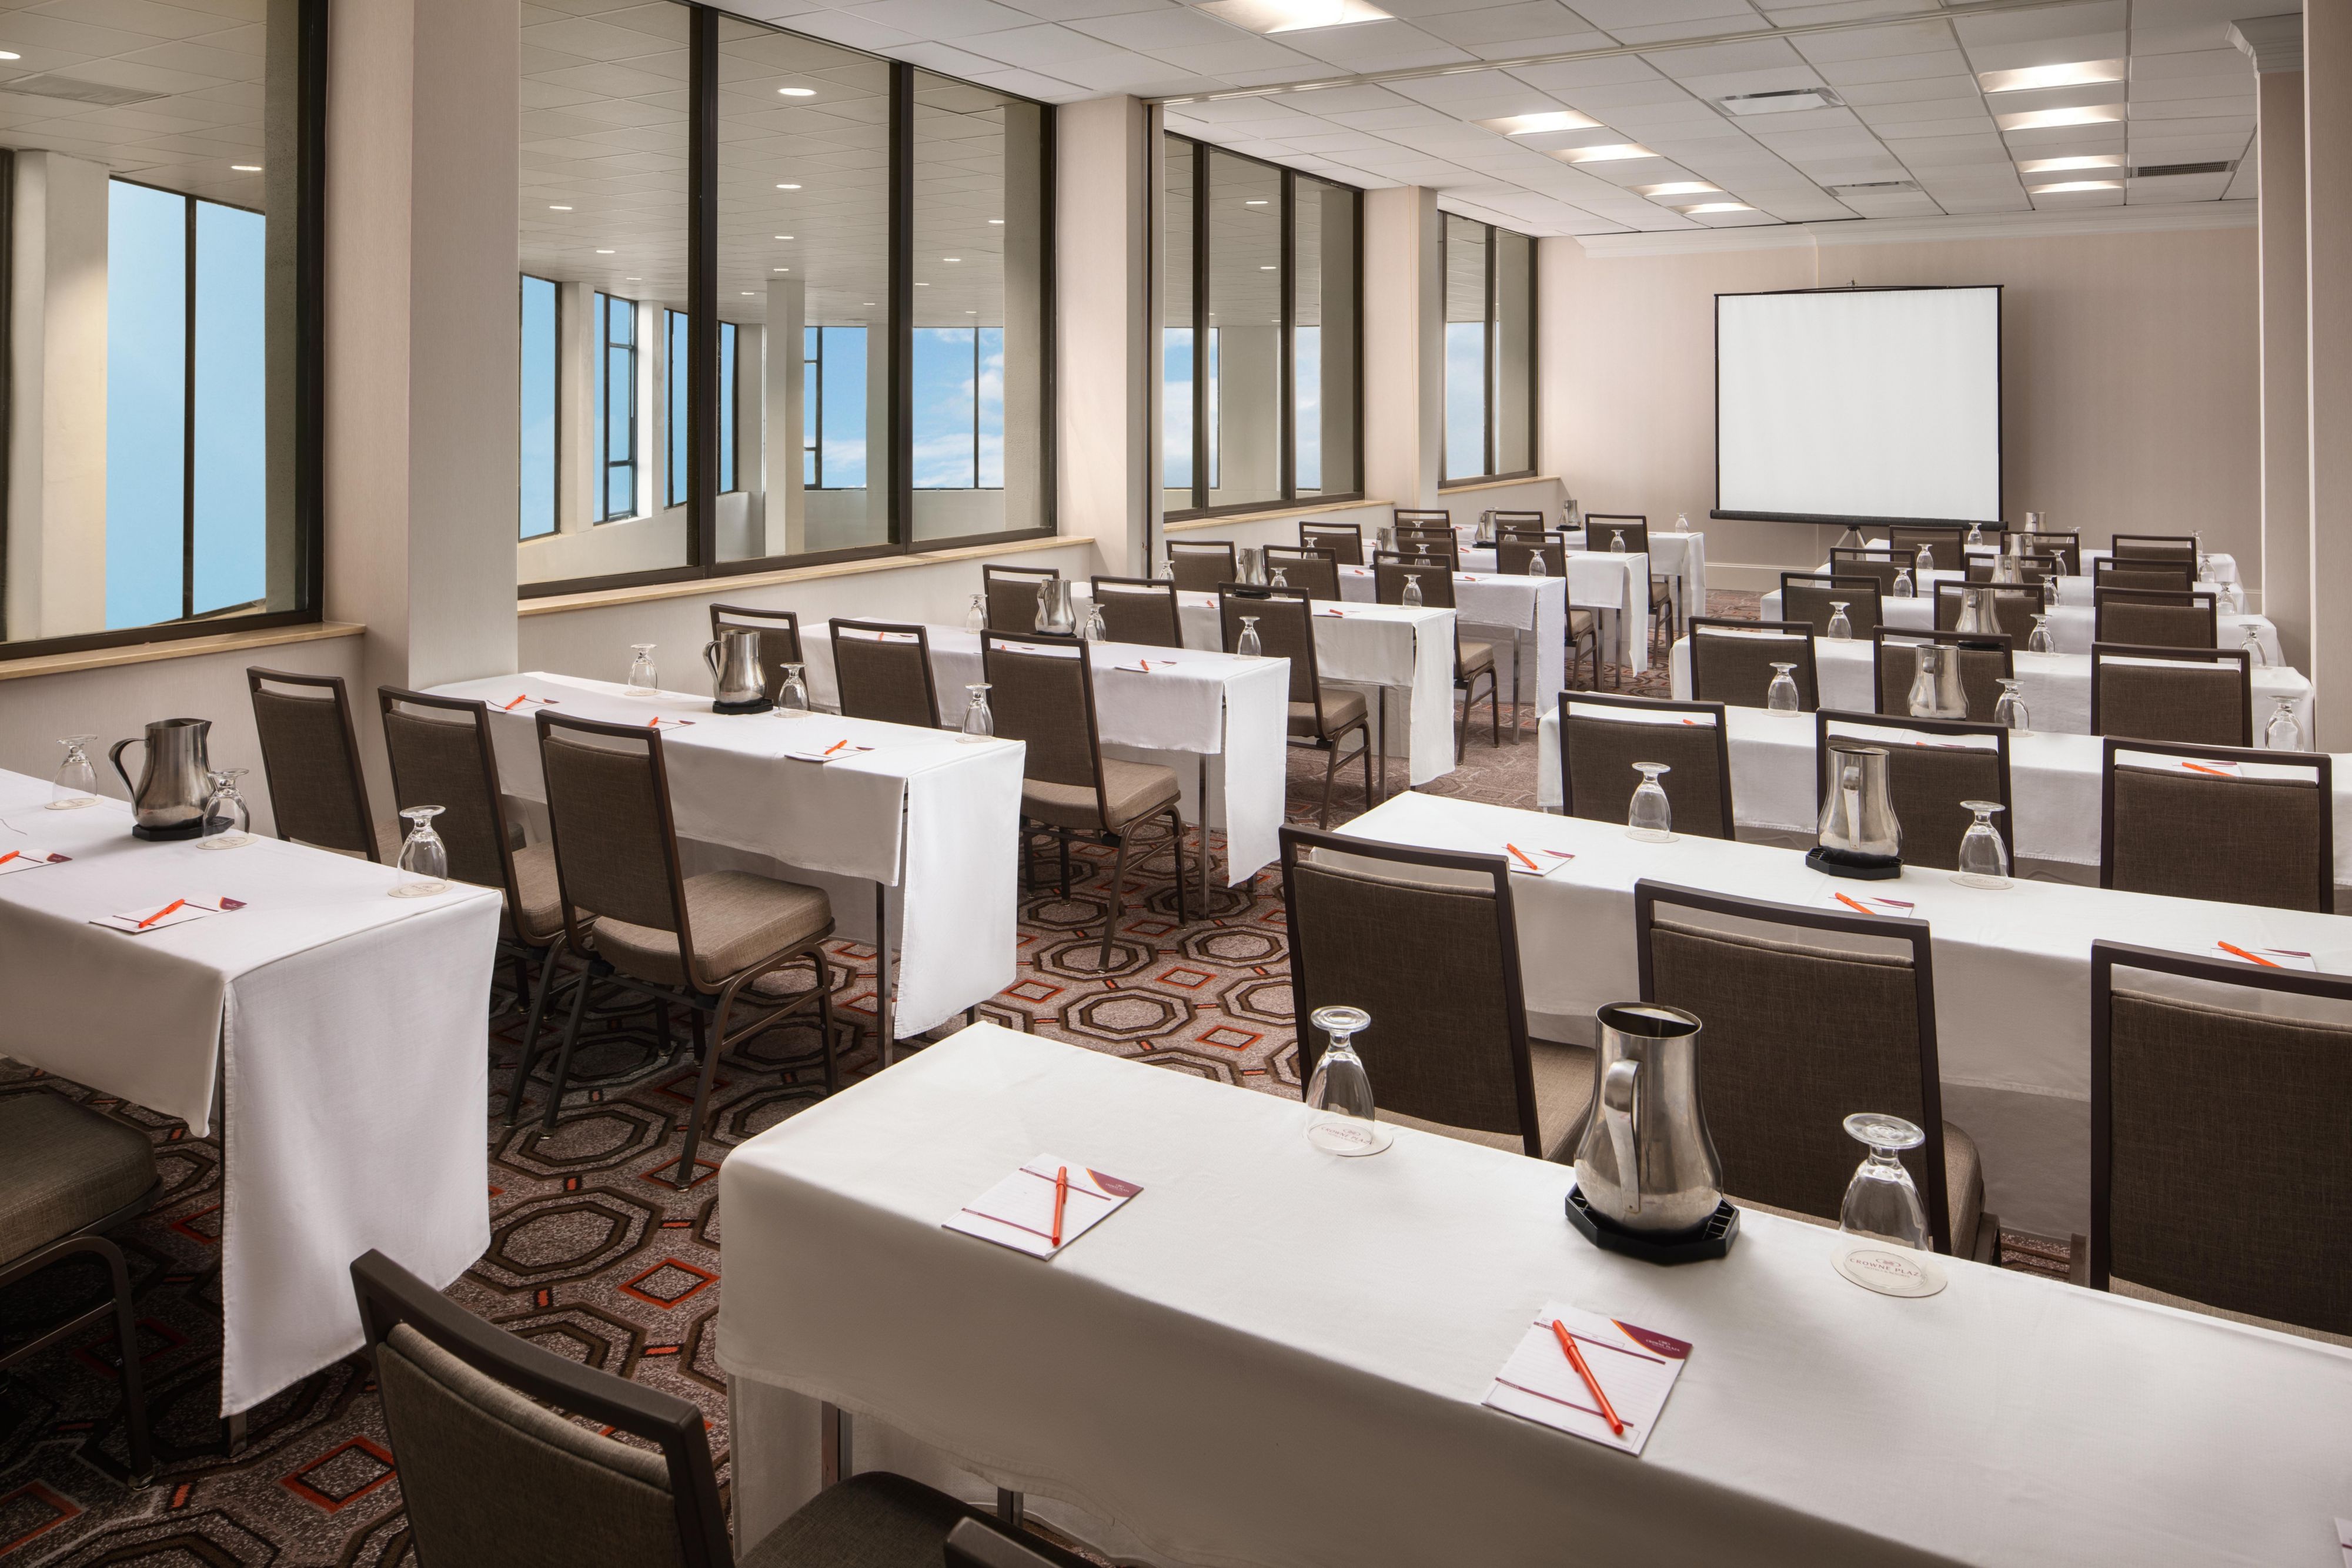 Bright windows and LED lighting set the scene for meetings.